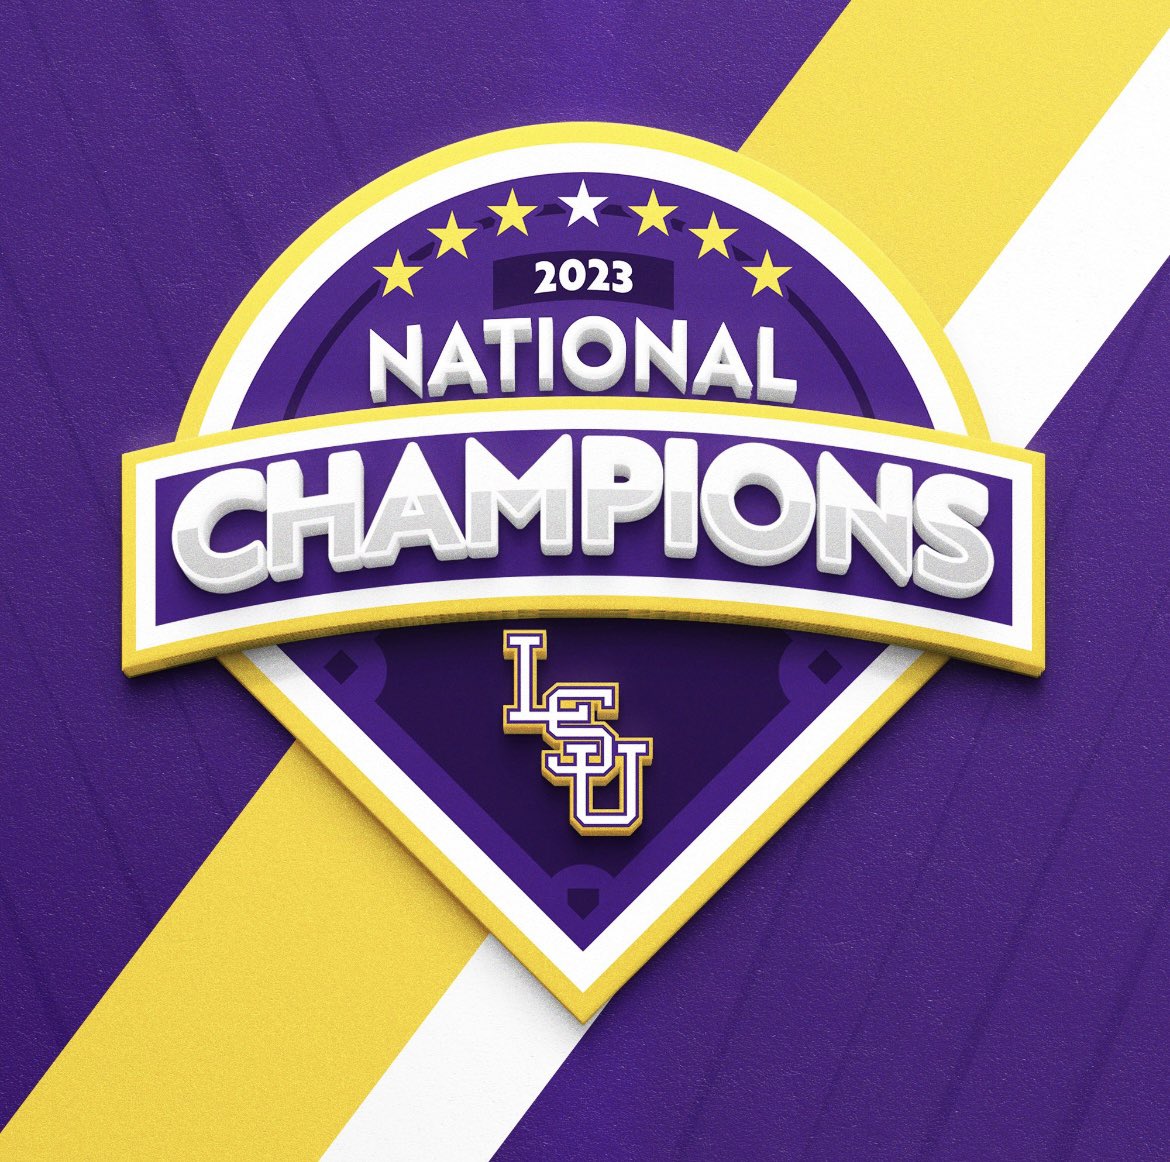 The LSU Tigers defeat the Florida Gators 18-4 in Game 3 of the College World Series and are now National Champions!🚨

#CollegeWorldSeries